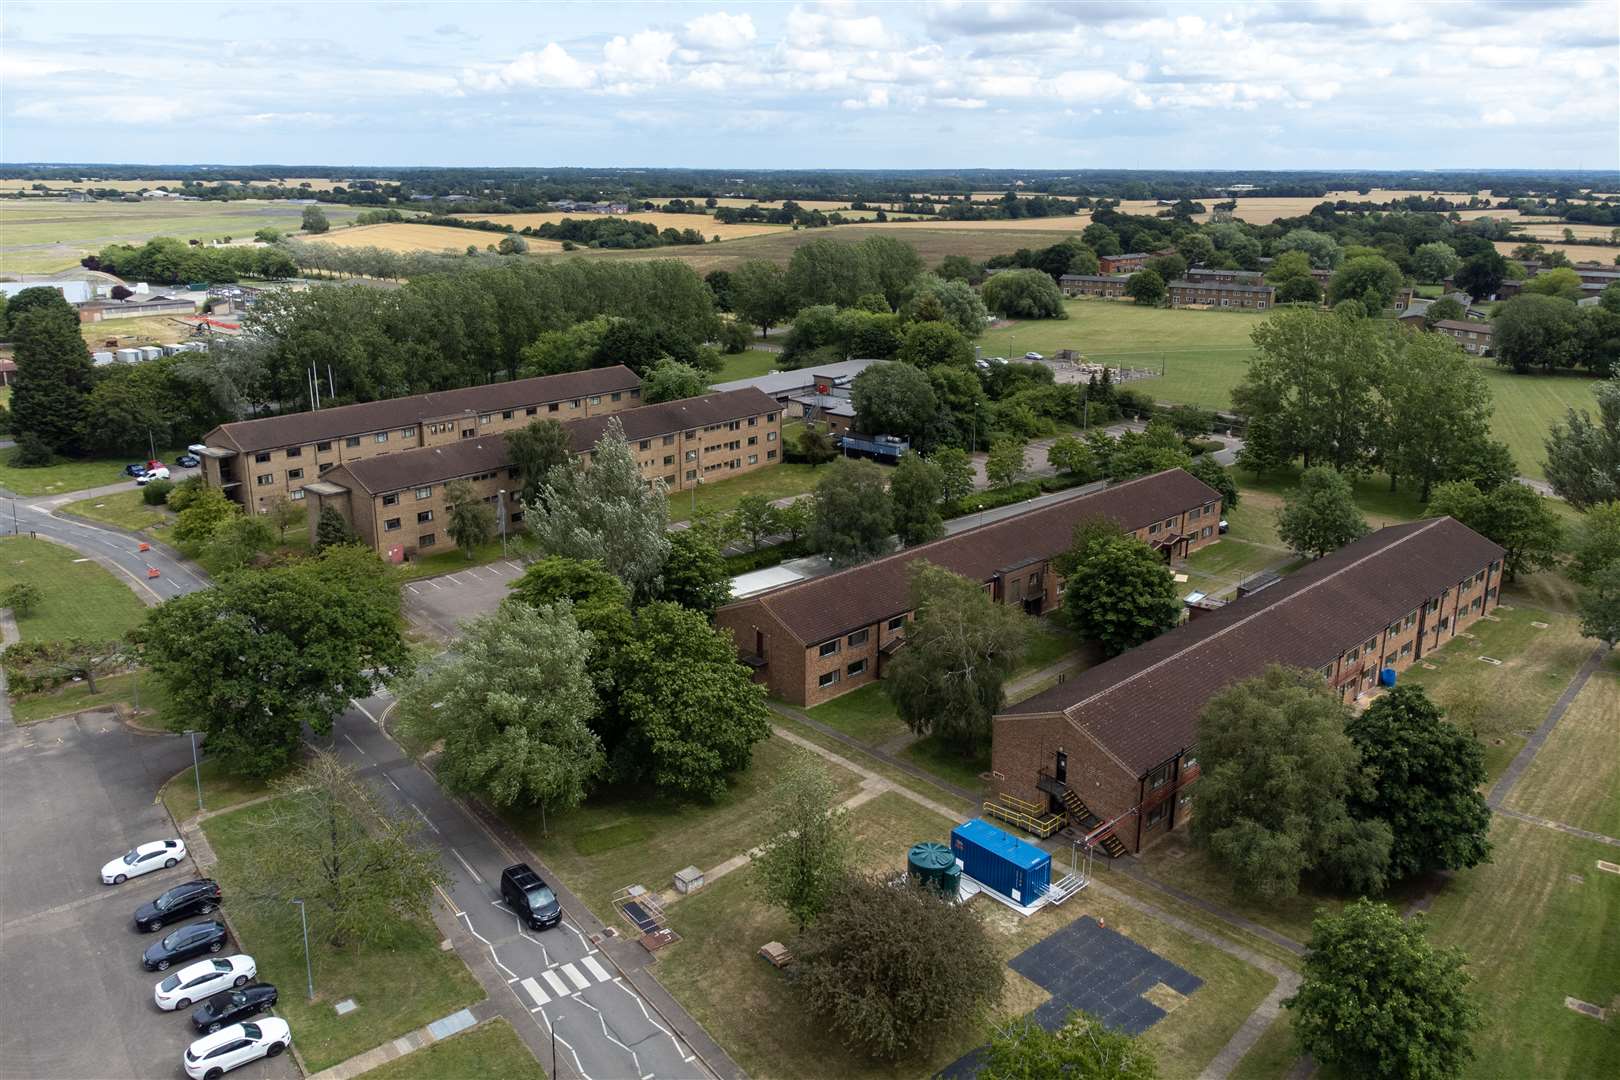 Aerial view of the asylum accommodation centre at MDP Wethersfield in Essex, a 335-hectare airfield owned by the Ministry of Defence (PA)